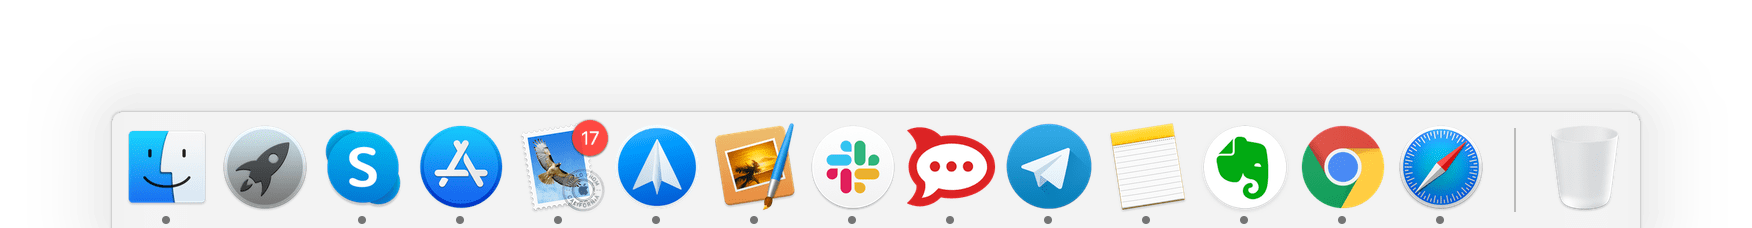 icons in dock panel in macOS Catalina